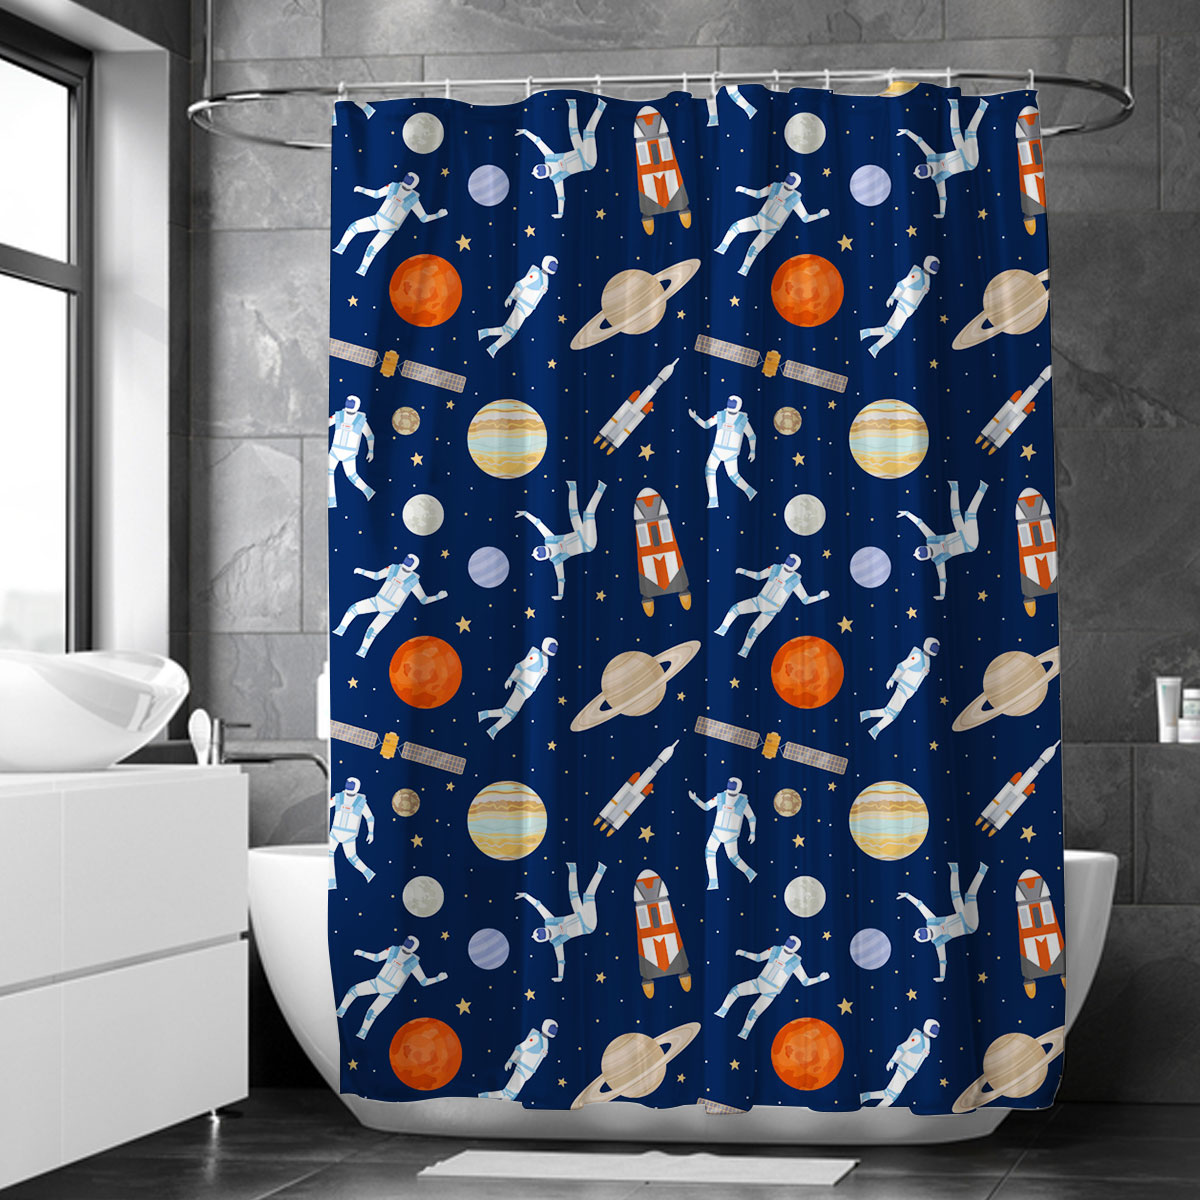 Outer Space Astronaut Shower Curtain